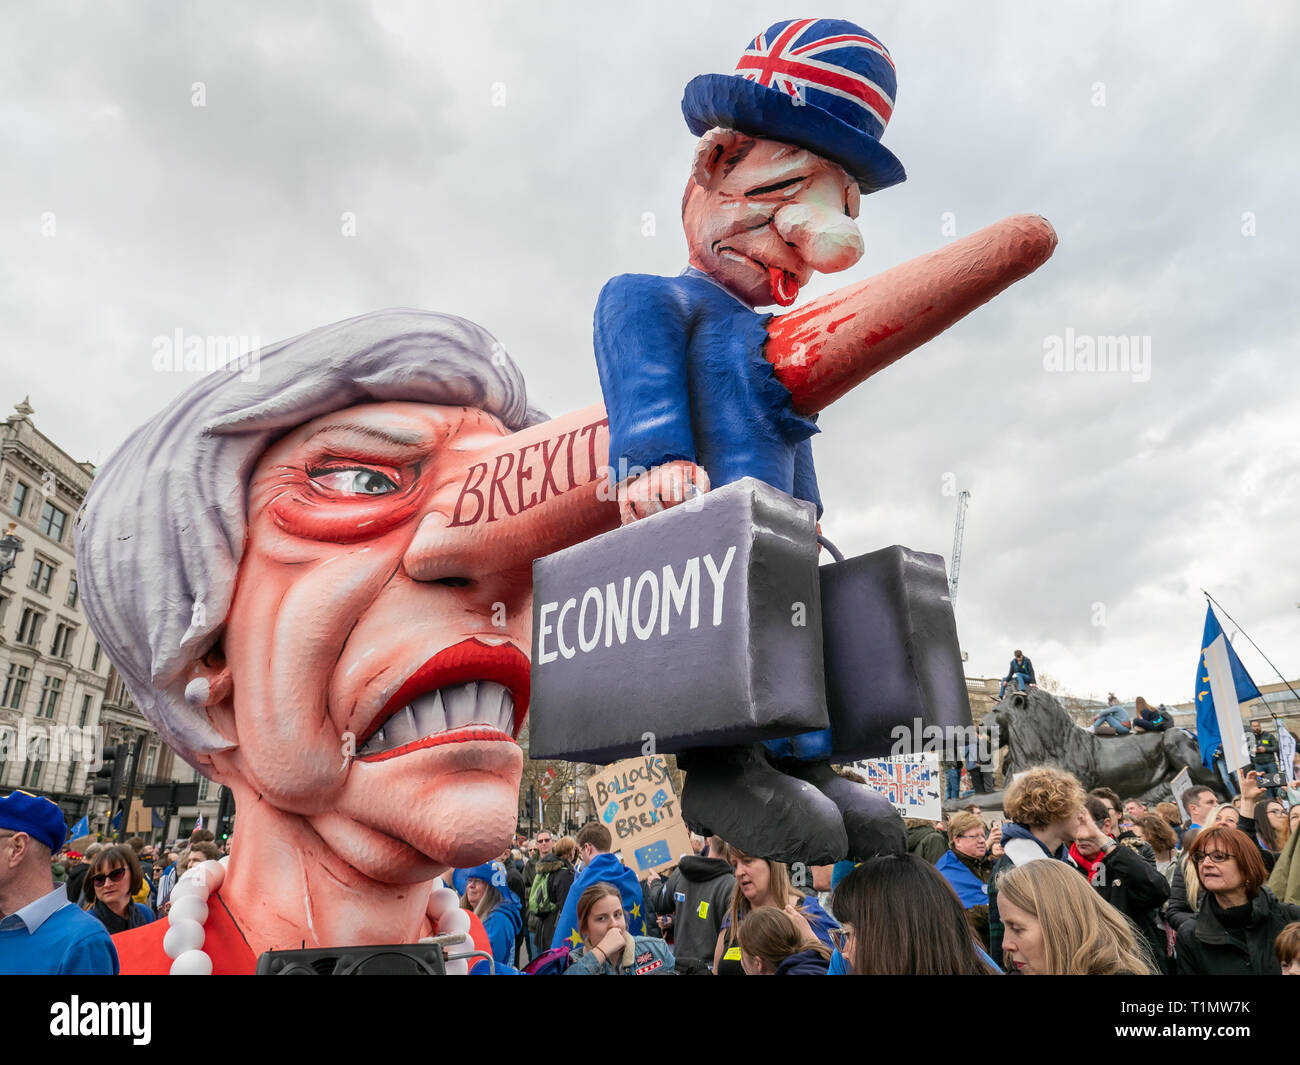 The Theresa May Nose Float by Jacques Tilly on the People's Vote March, 23 March 2019, London, UK Stock Photo